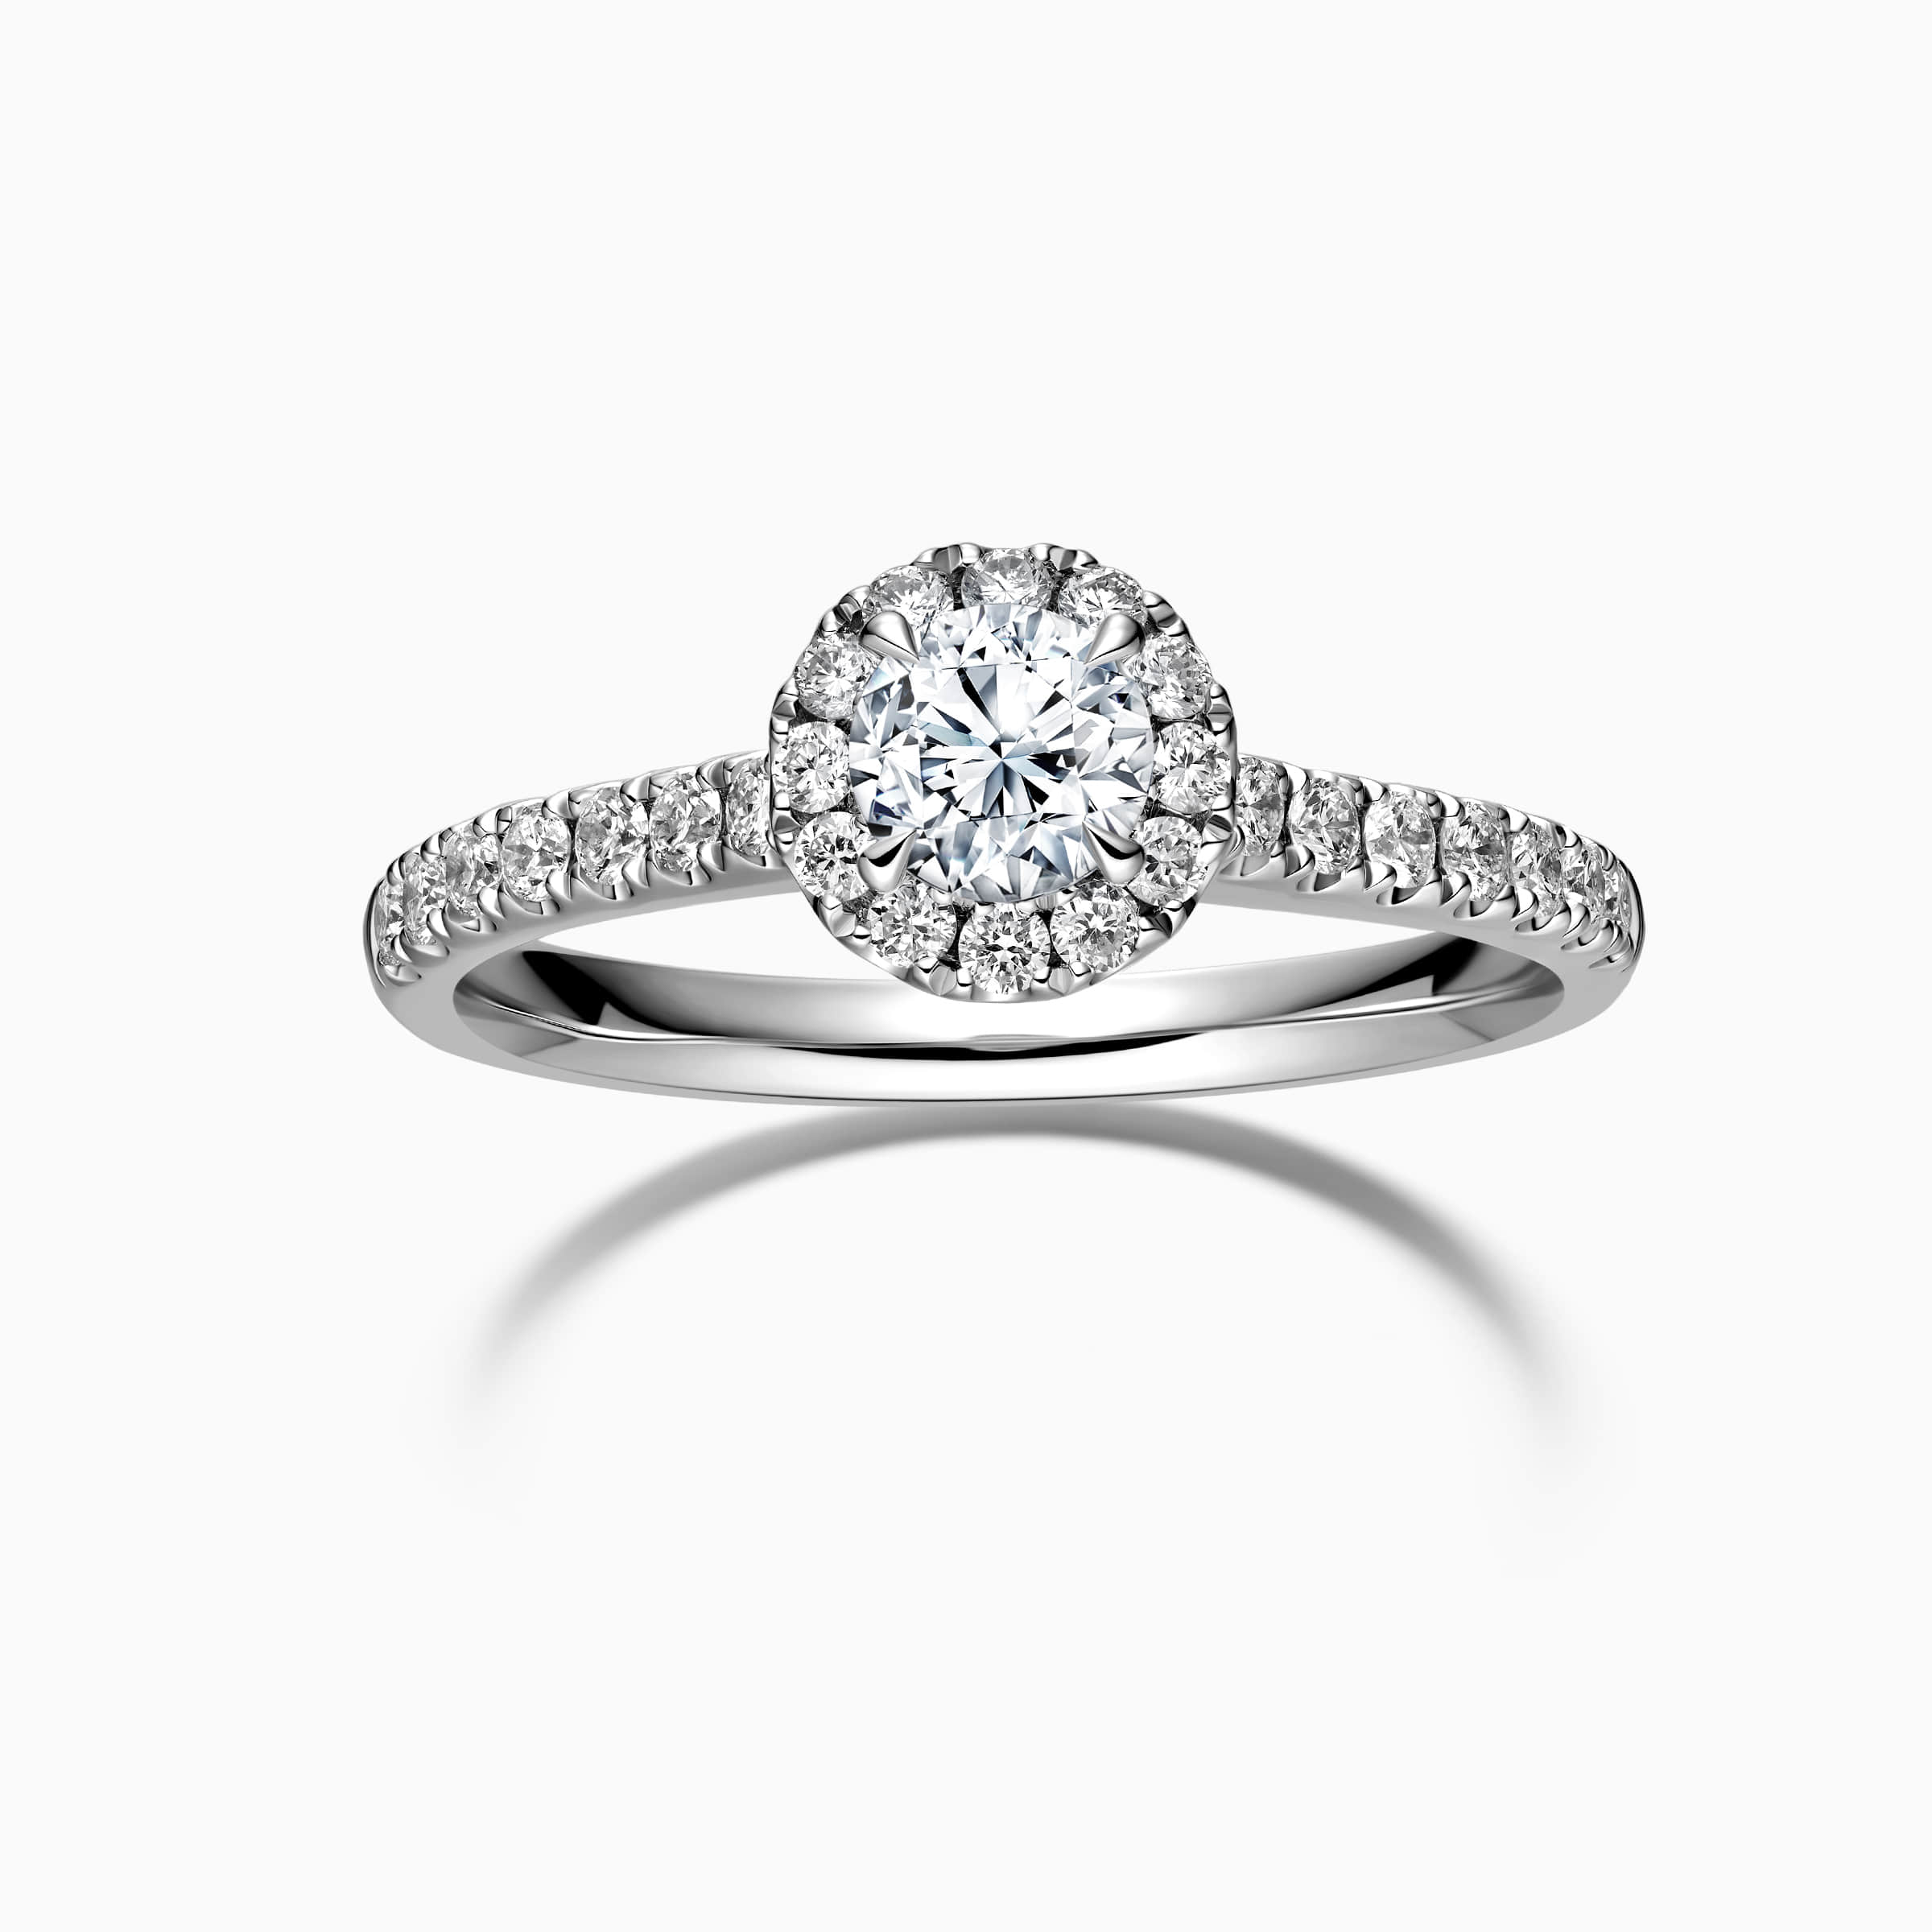 DR Love Mark round halo engagement ring